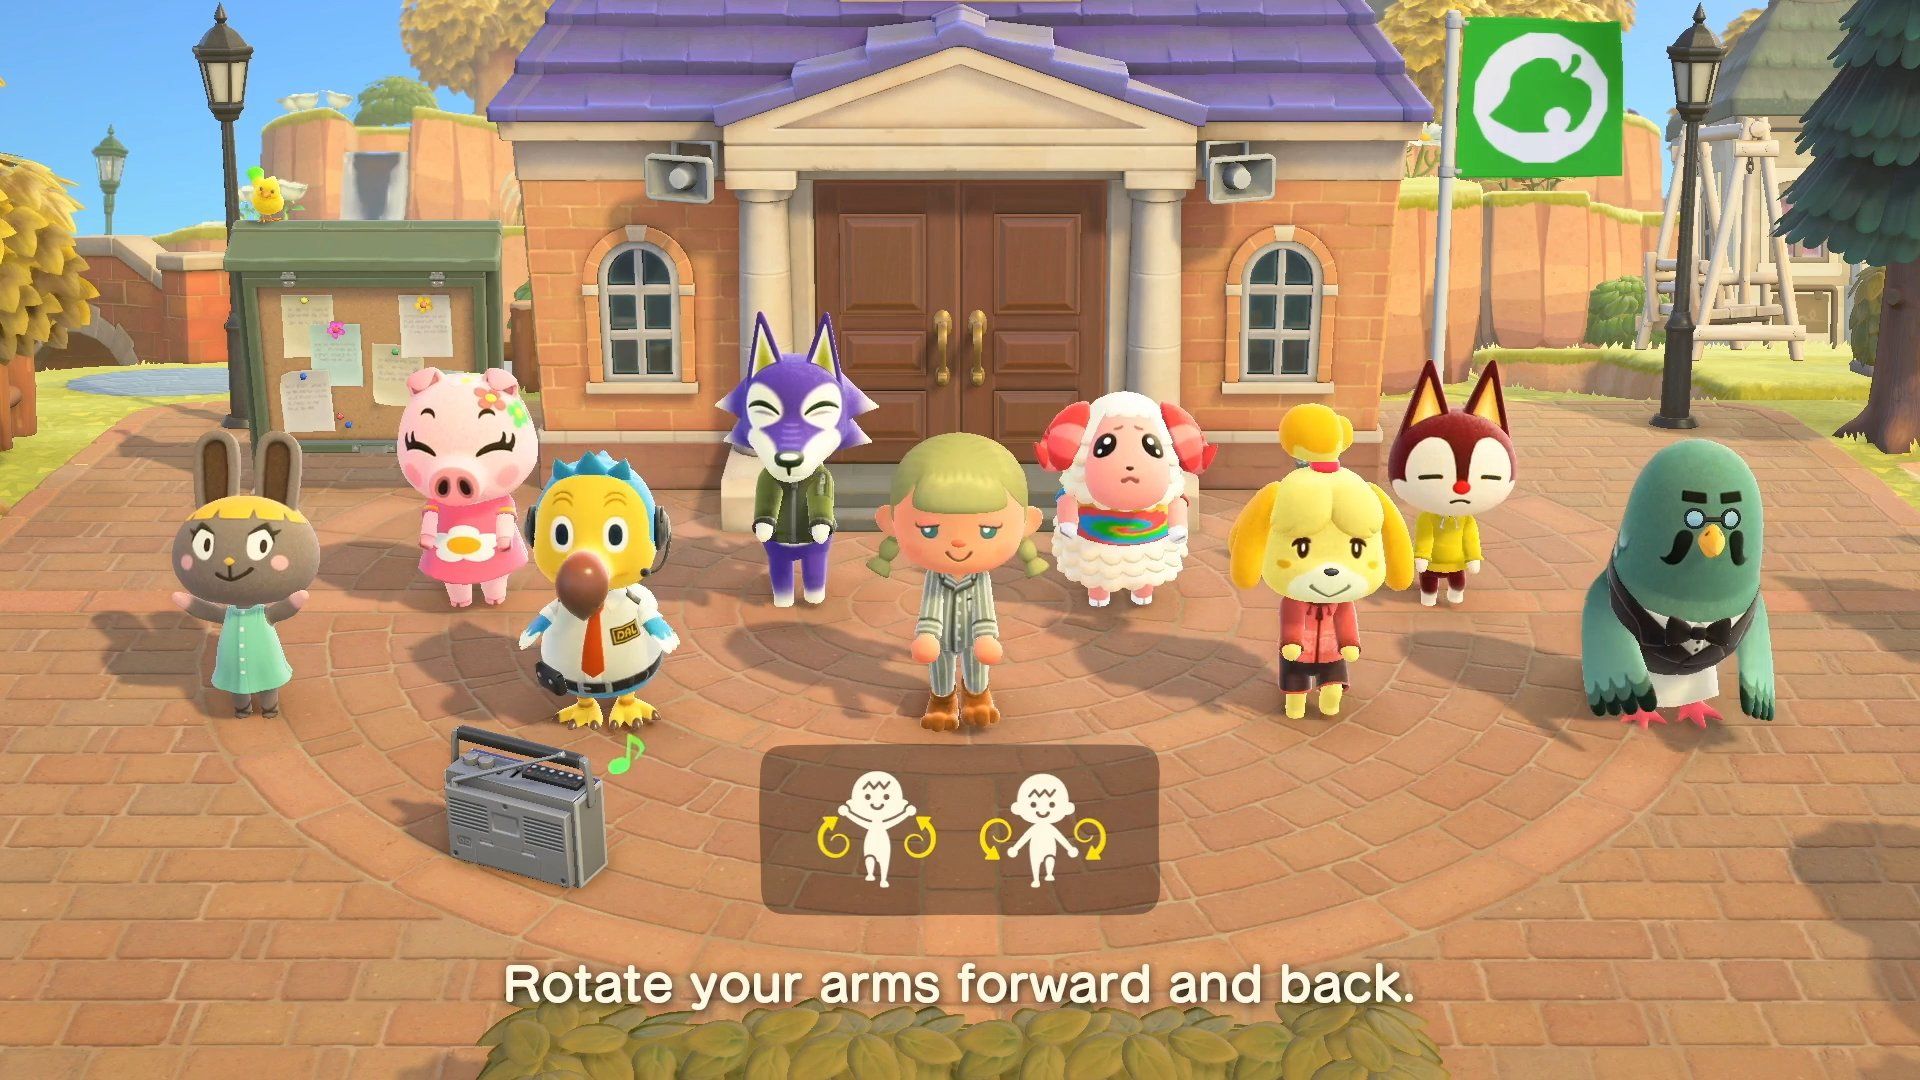 Animal Crossing New Horizons Is Finally Getting The Update It Deserves Shame It’s The Last One